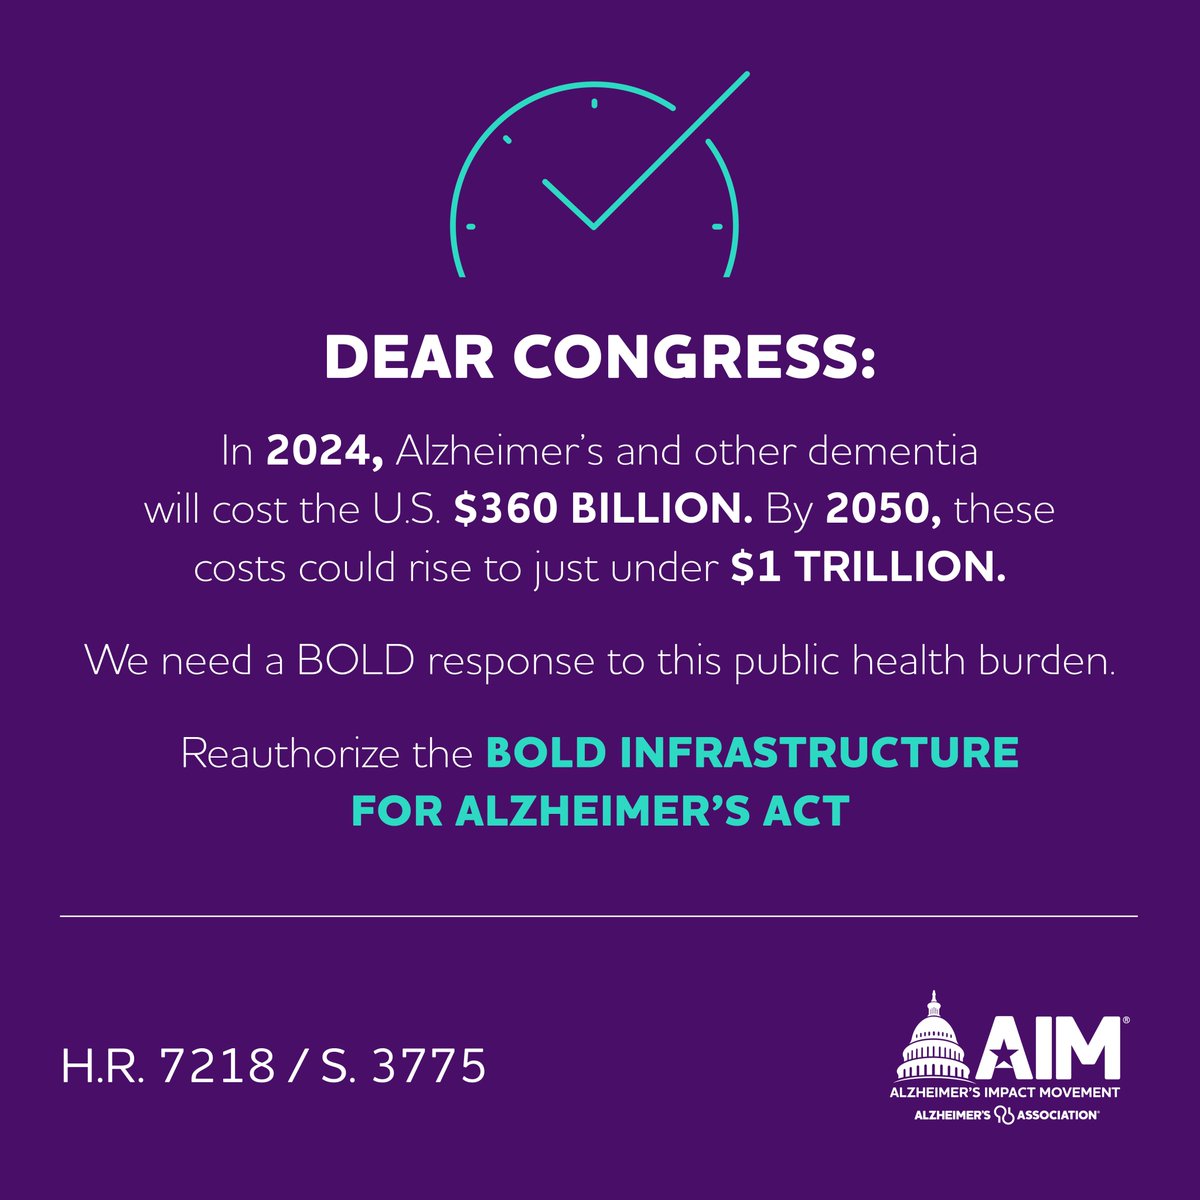 Our advocates are turning Capitol Hill purple today! Add your voice to theirs by telling Congress to reauthorize the #BOLDAlzheimersAct! We must continue growing our nation’s public health infrastructure. Take action here➡️: p2a.co/93BIPIB #alzforum #ENDALZ